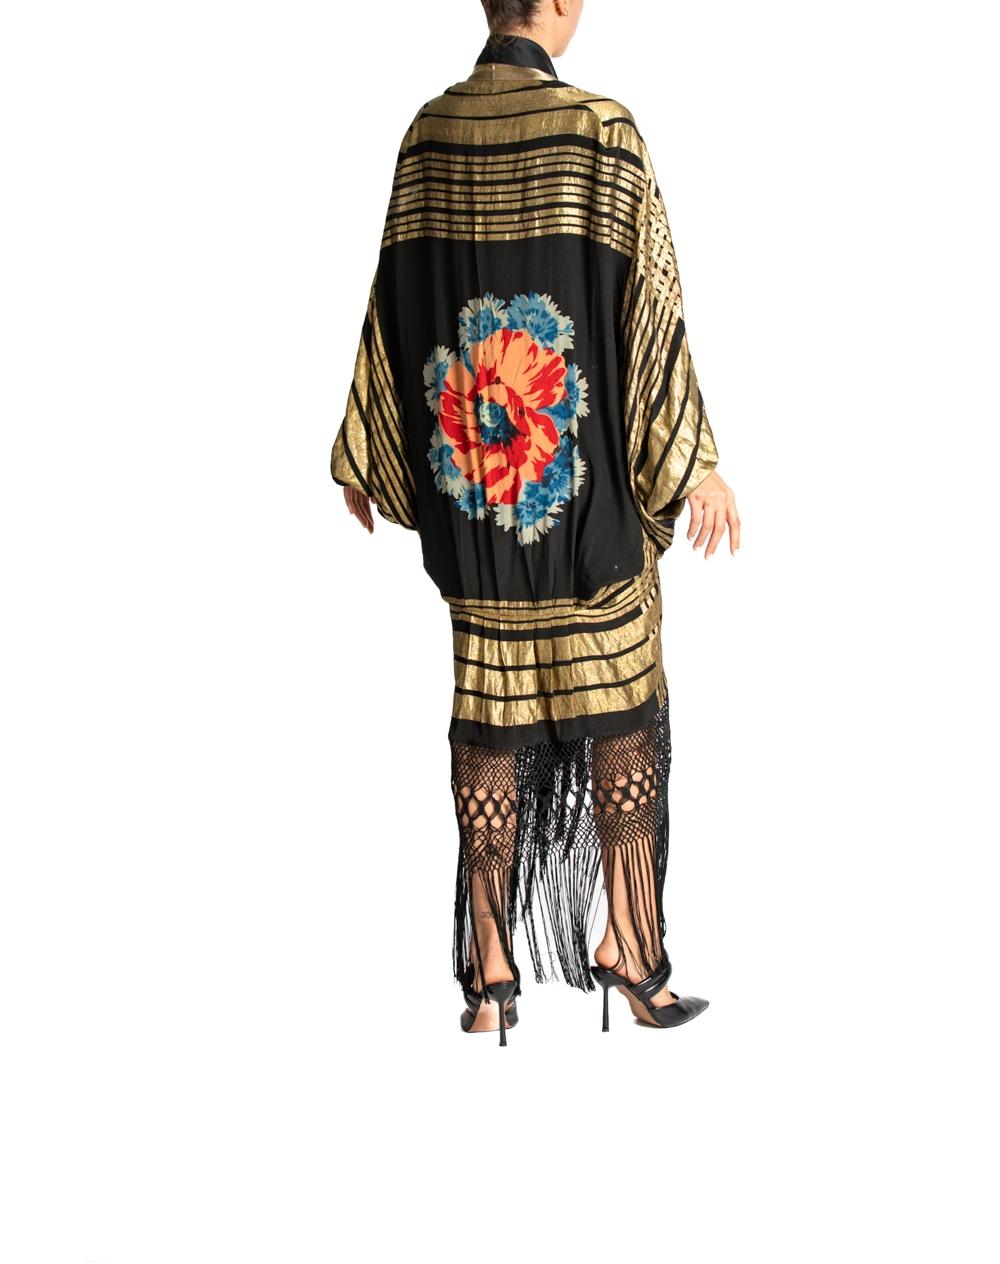 MORPHEW ATELIER Gold Black Lamé Luxurious And Silk With Hand Printed Flower Des For Sale 3